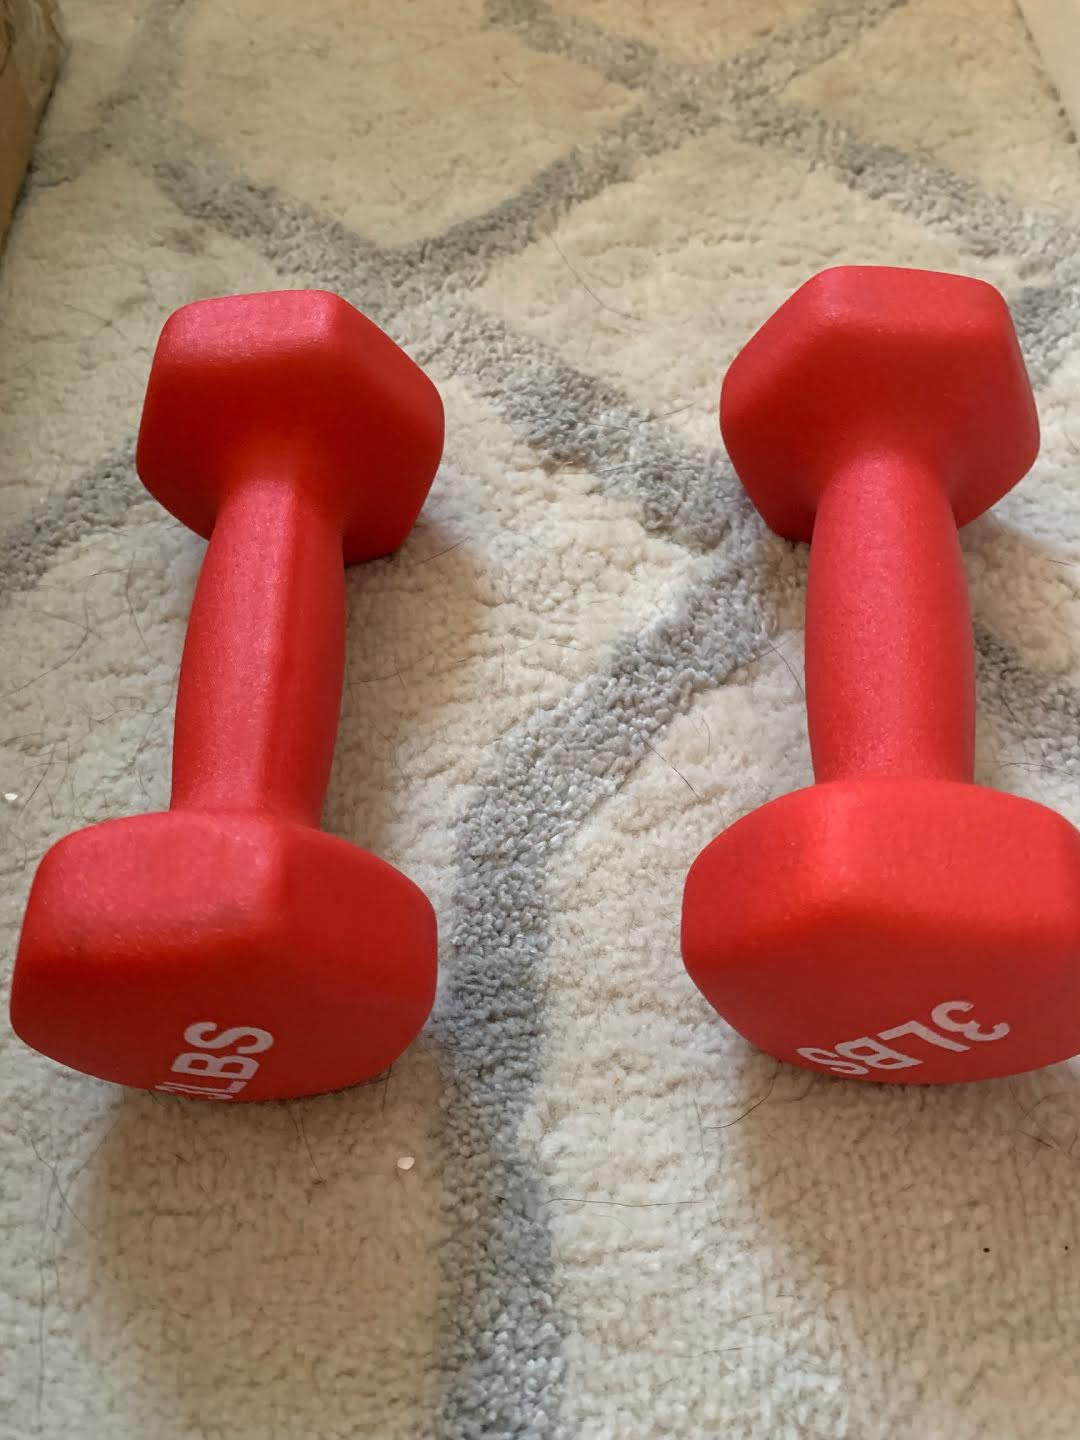 3 pound dumbbells included with the velocore